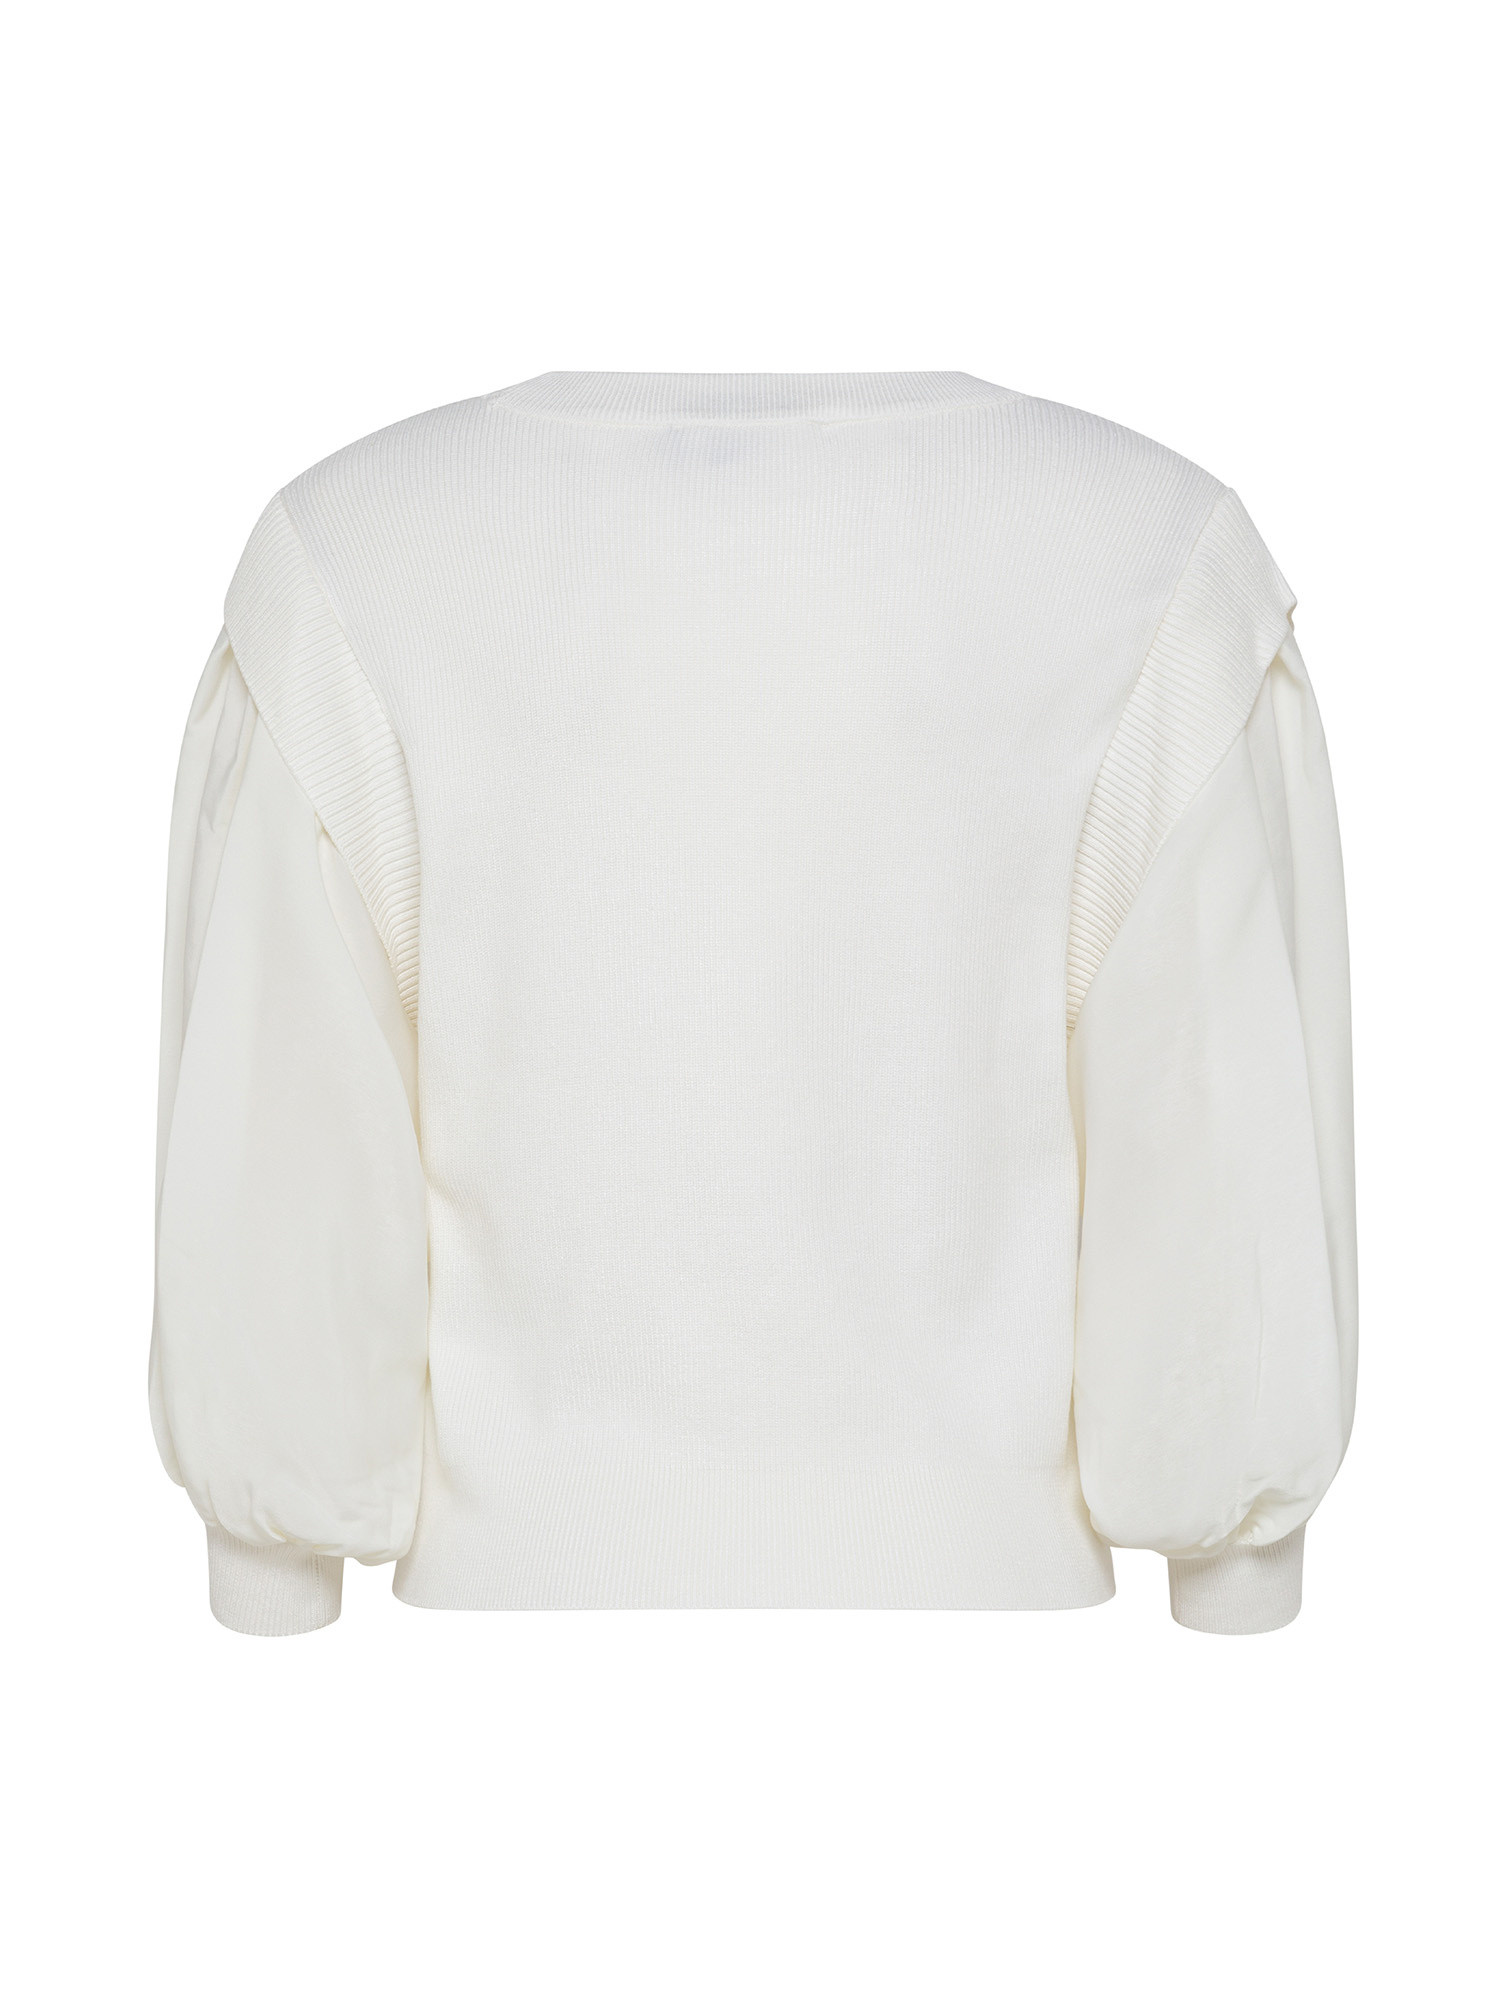 DKNY - Ribbed top with contrasting chiffon sleeve, White Ivory, large image number 1